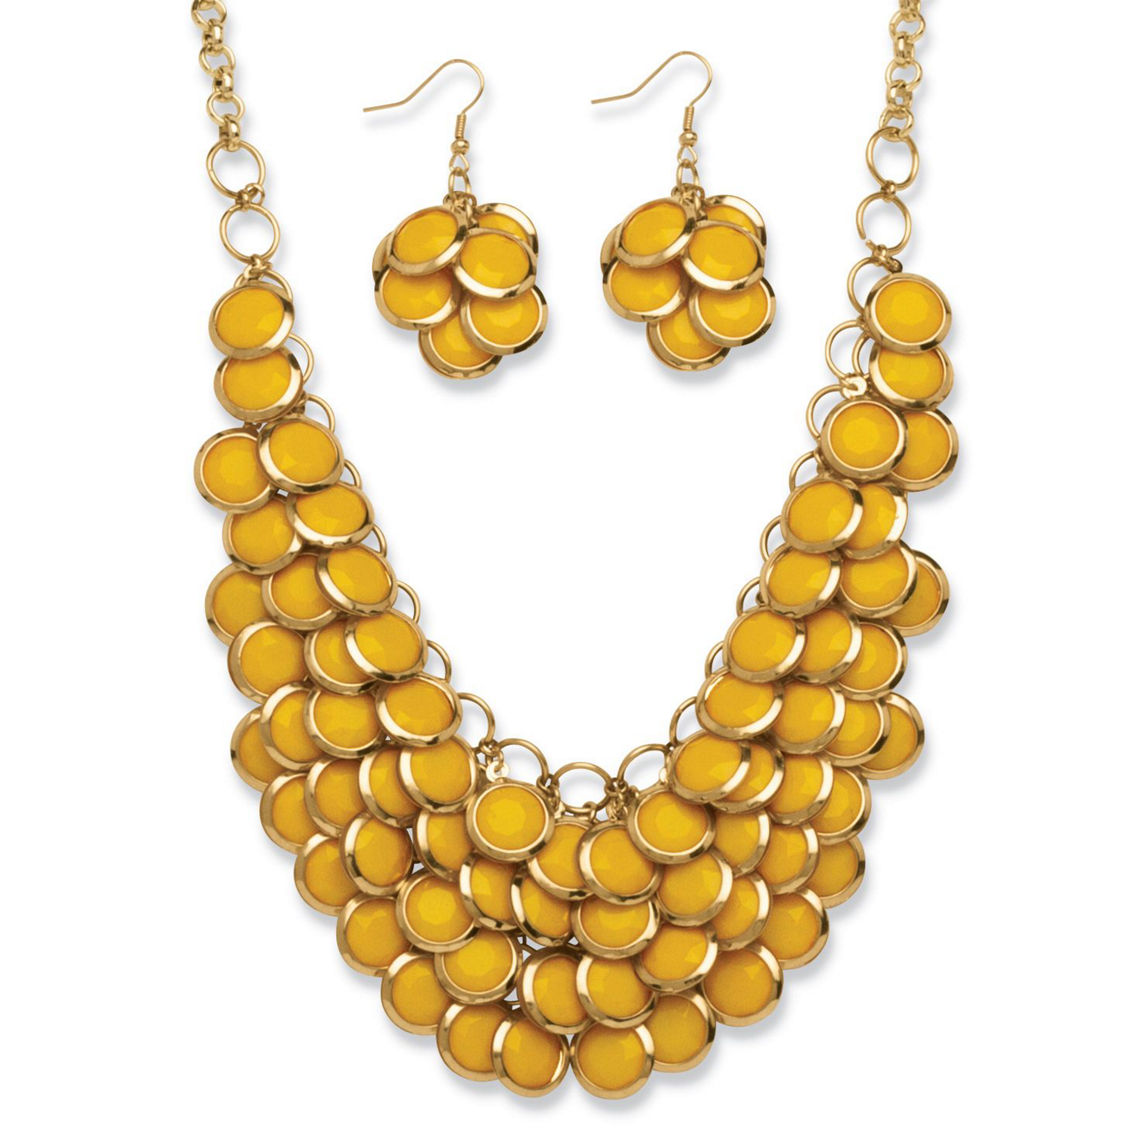 2 Piece Yellow Bib Necklace and Cluster Earrings Set in Yellow Goldtone